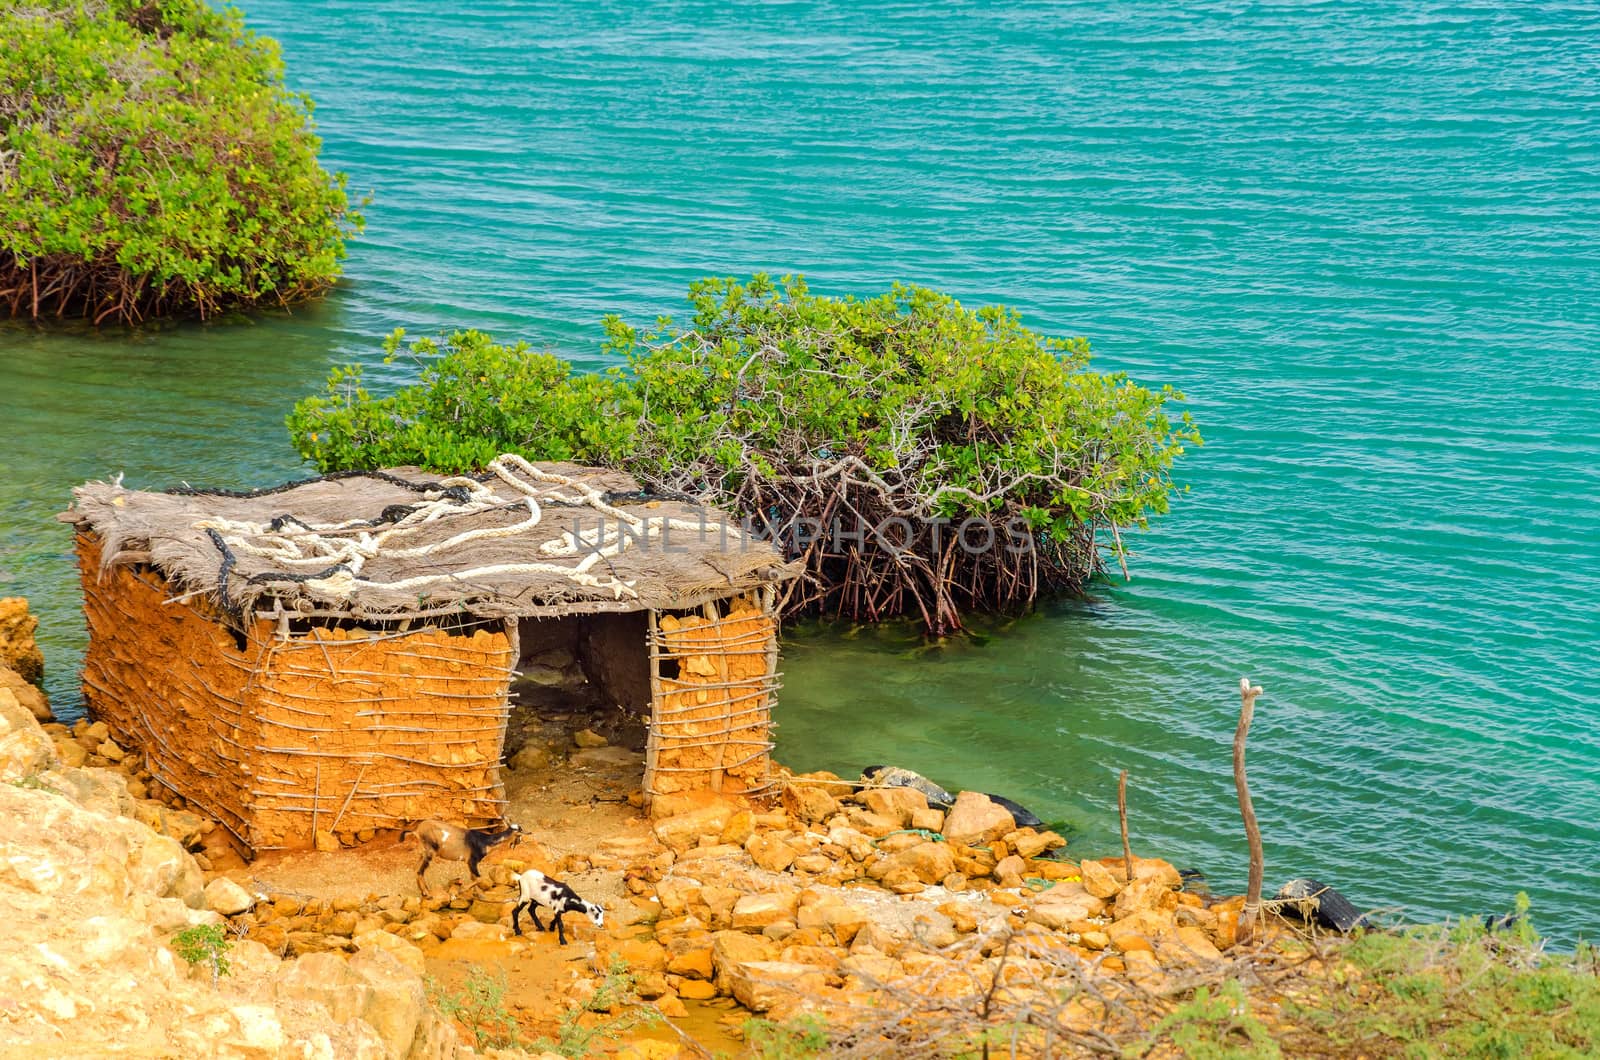 Two goats in front of a small mud shack near Punta Gallinas in La Guajira, Colombia